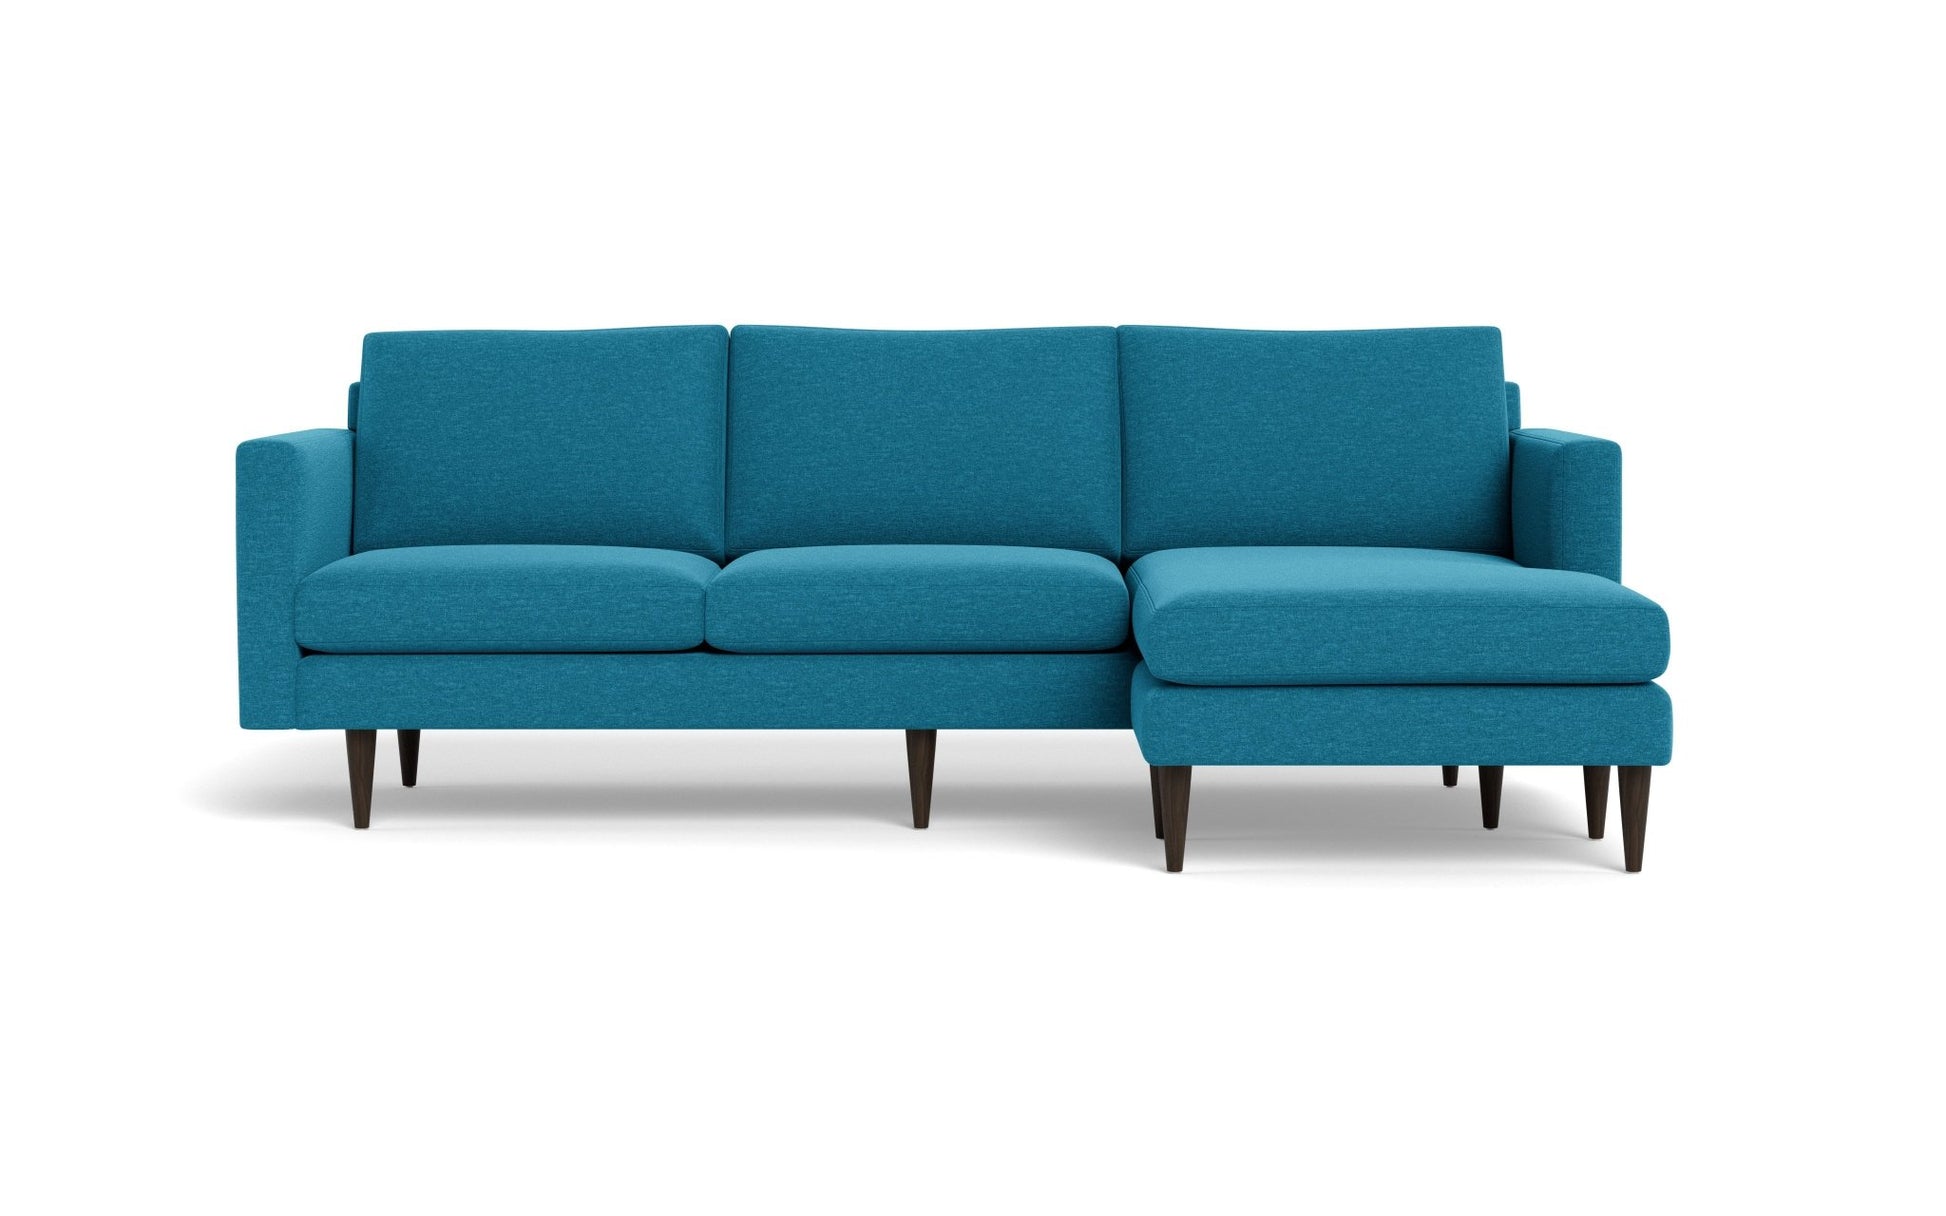 Wallace Untufted Reversible Chaise Sofa - Bennett Peacock